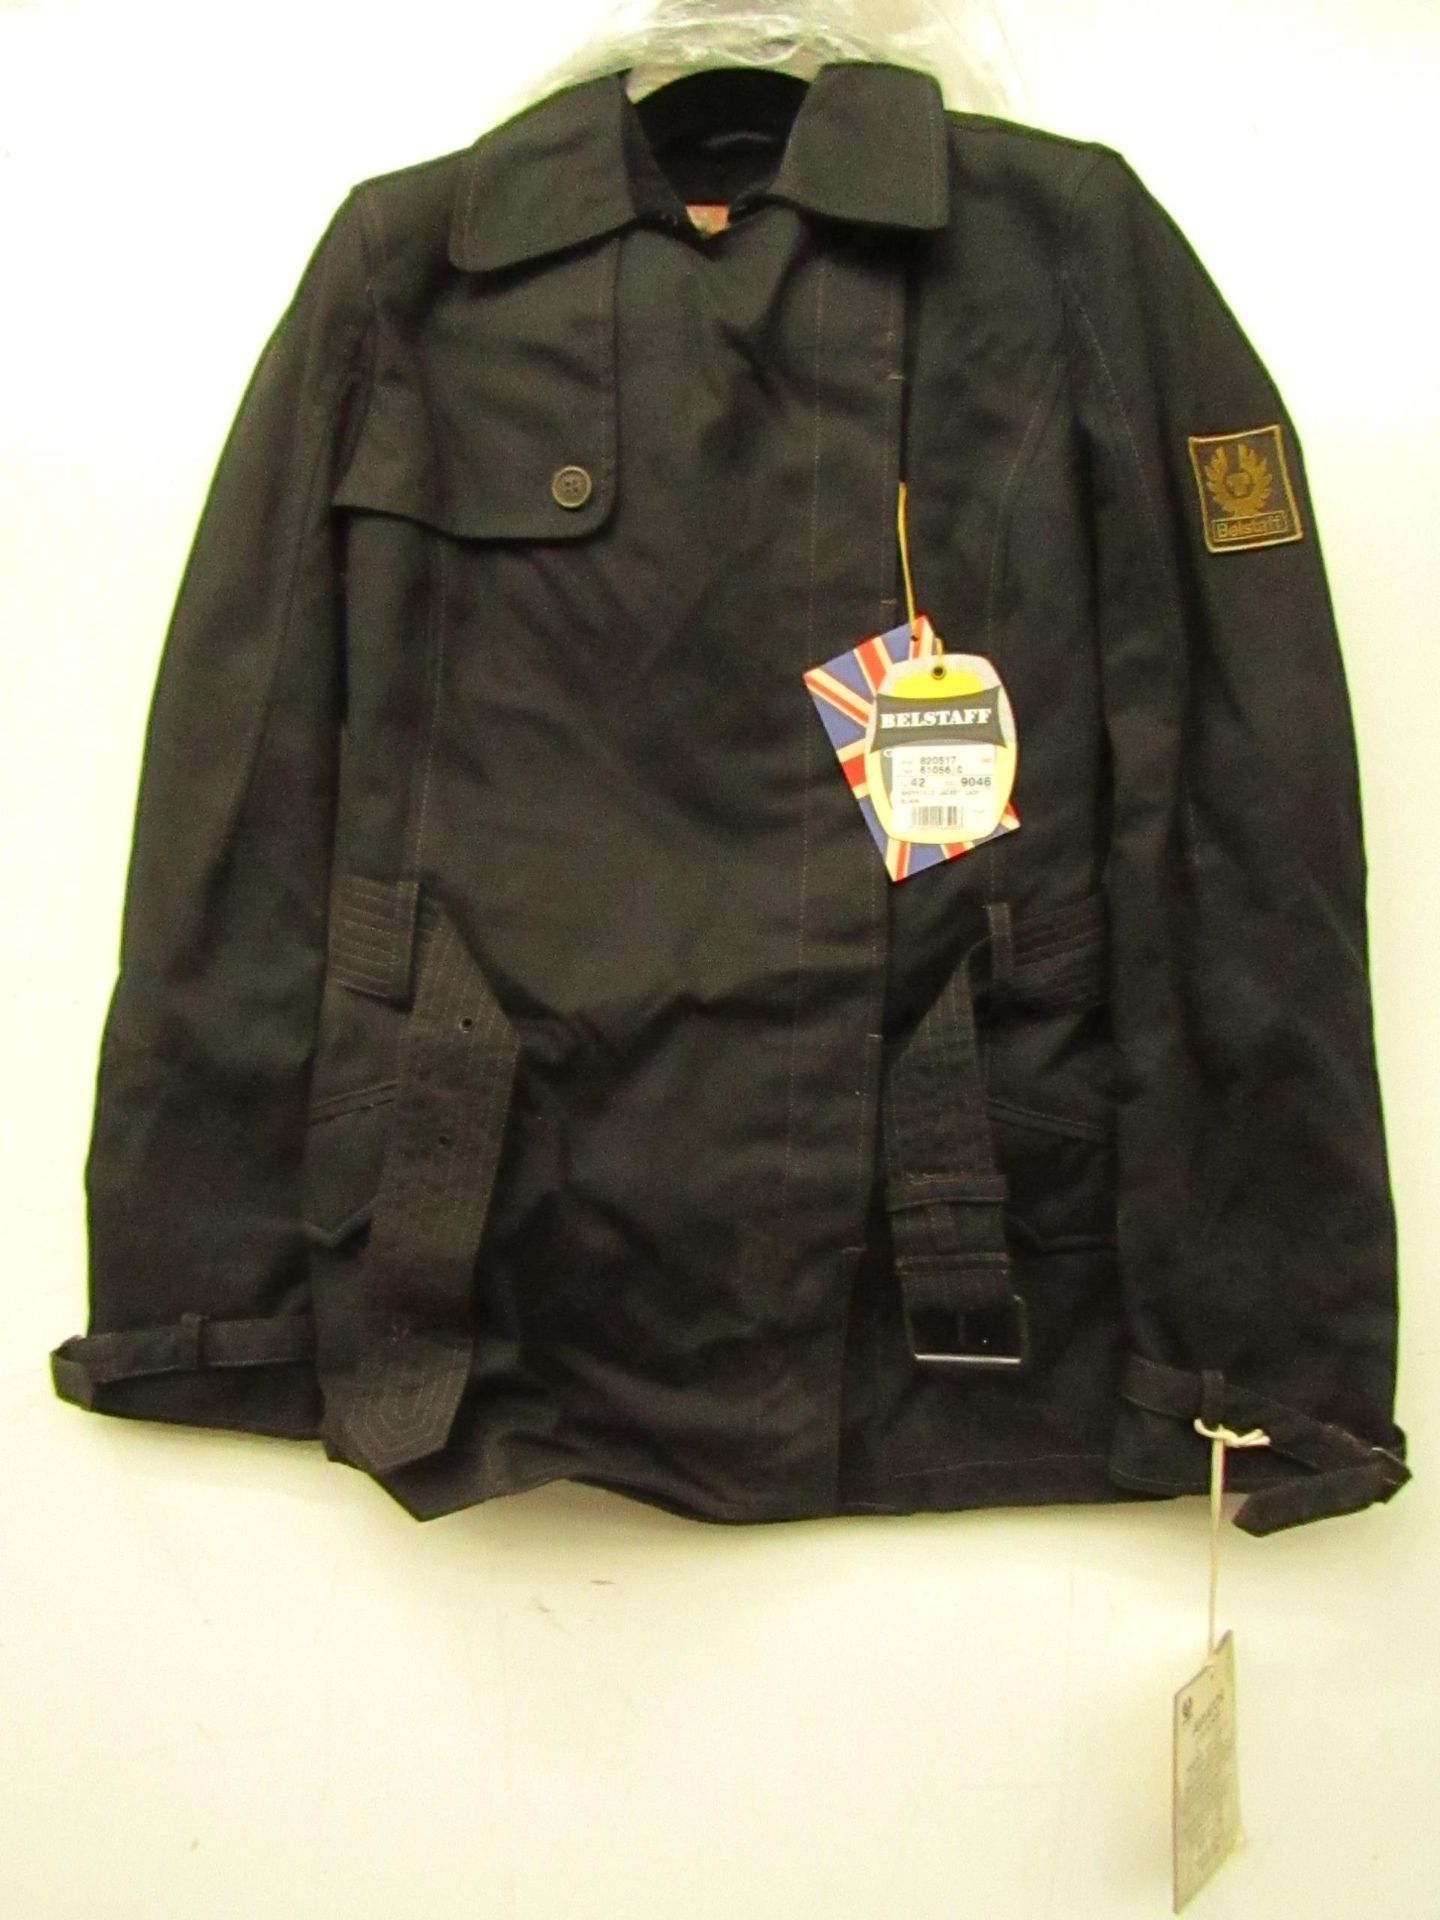 Ladies Belstaff Sheffield Jacket,new with tag, size 42